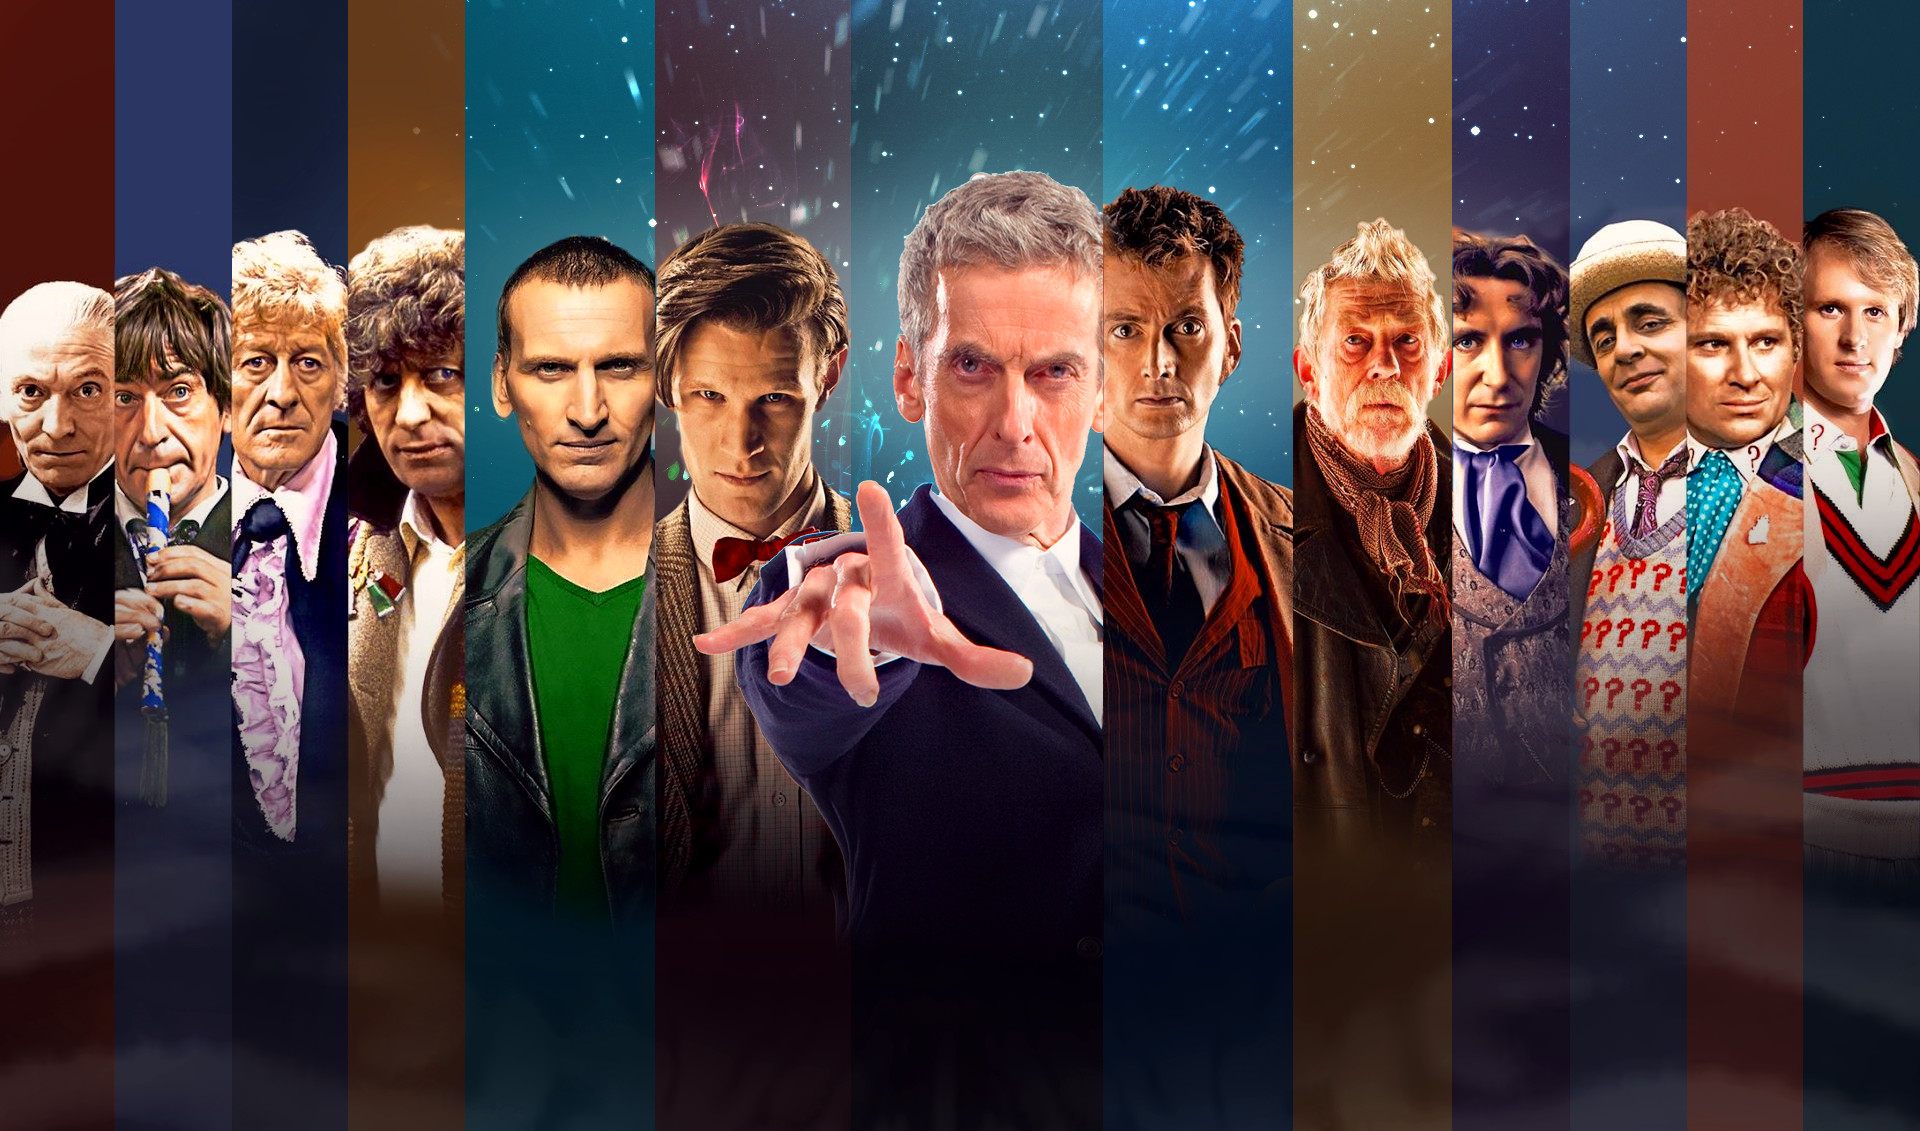 All Doctors – Doctor Who